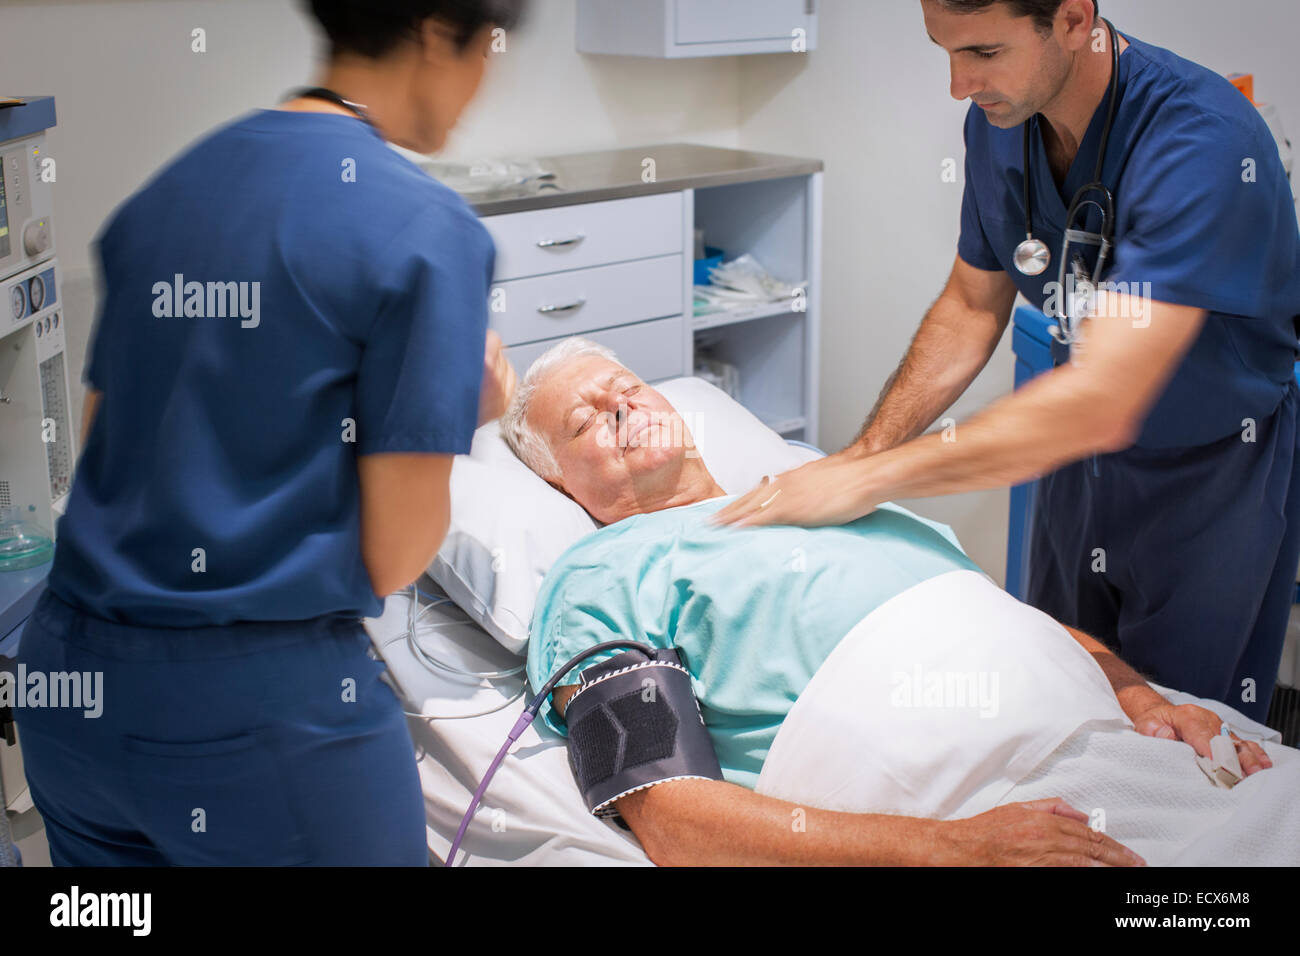 Doctor performing CPR on unconscious patient in emergency room Stock Photo